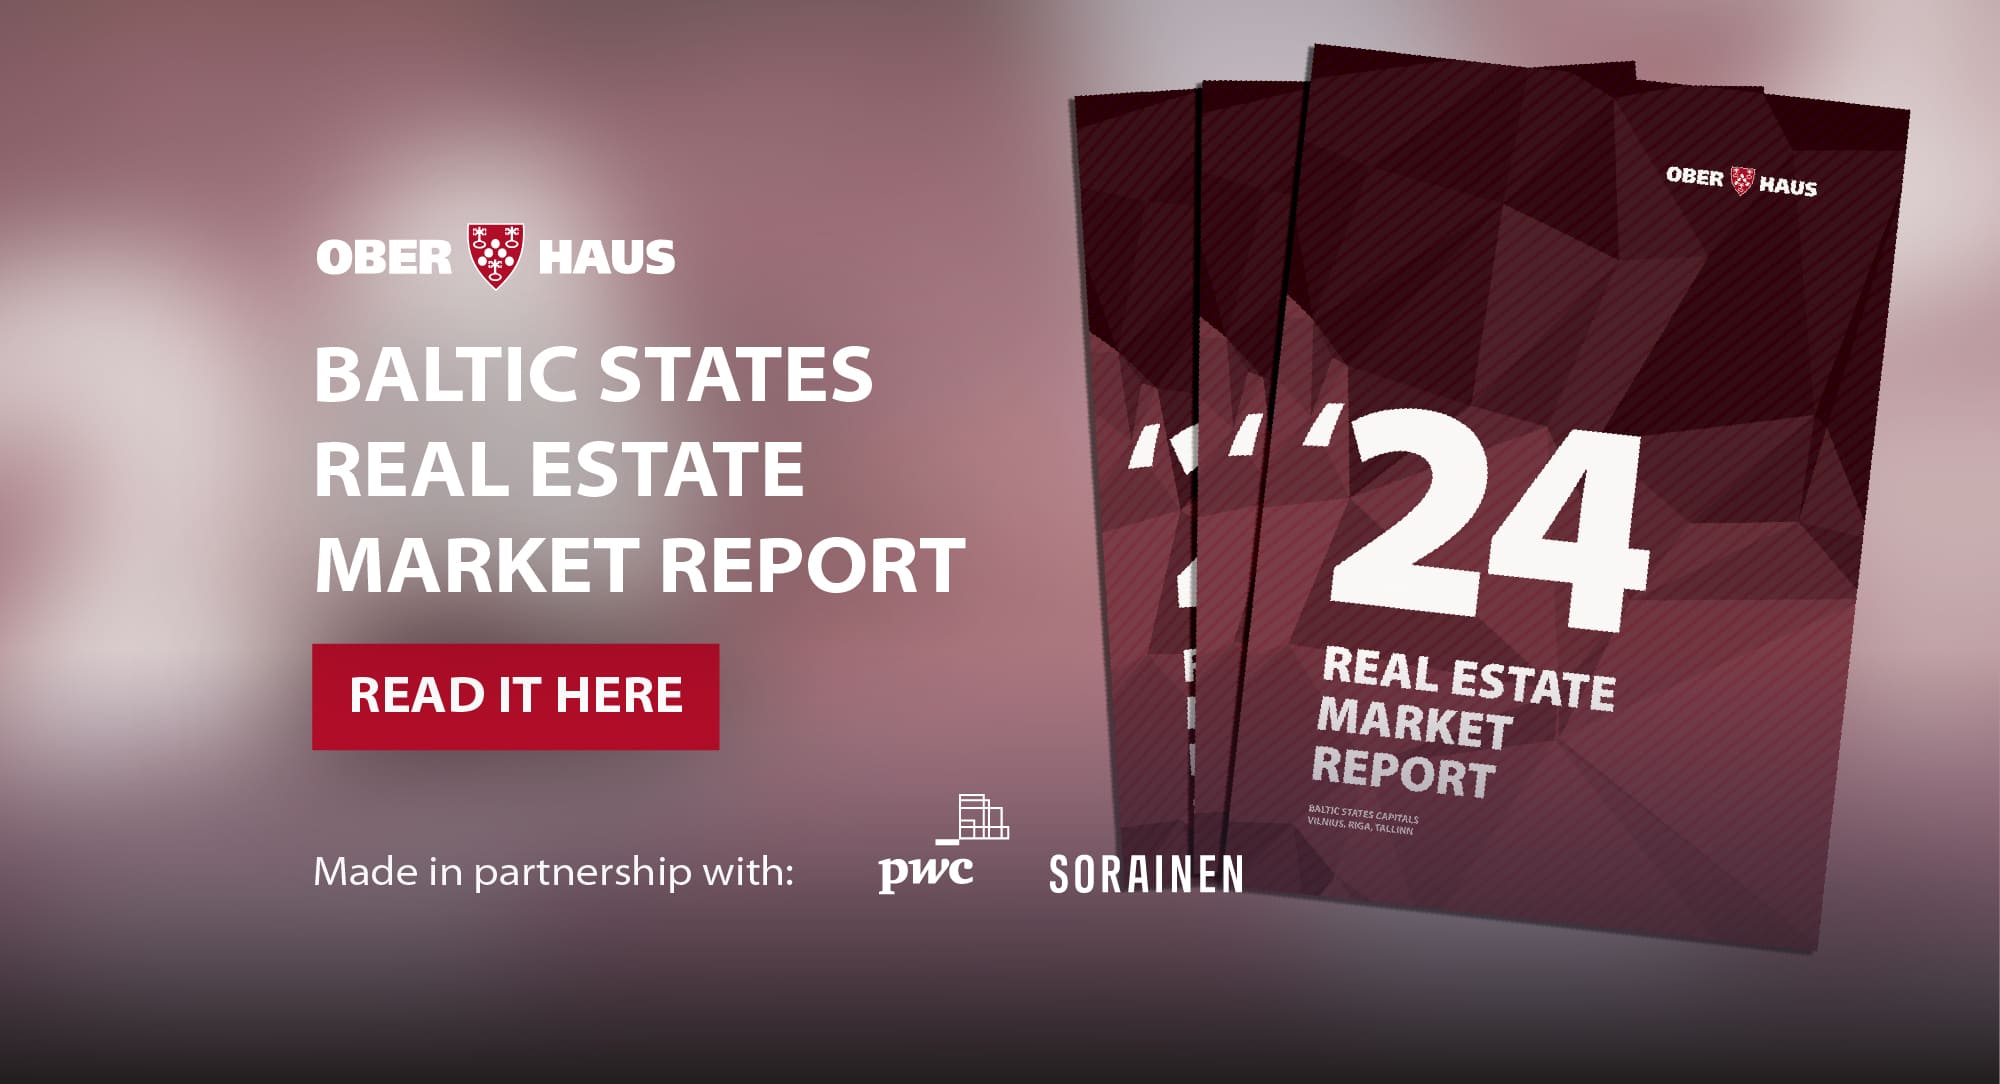 Real estate markets in the Baltic countries are experiencing varying degrees of difficulties, yet at the same time opening up opportunities for the most active participants